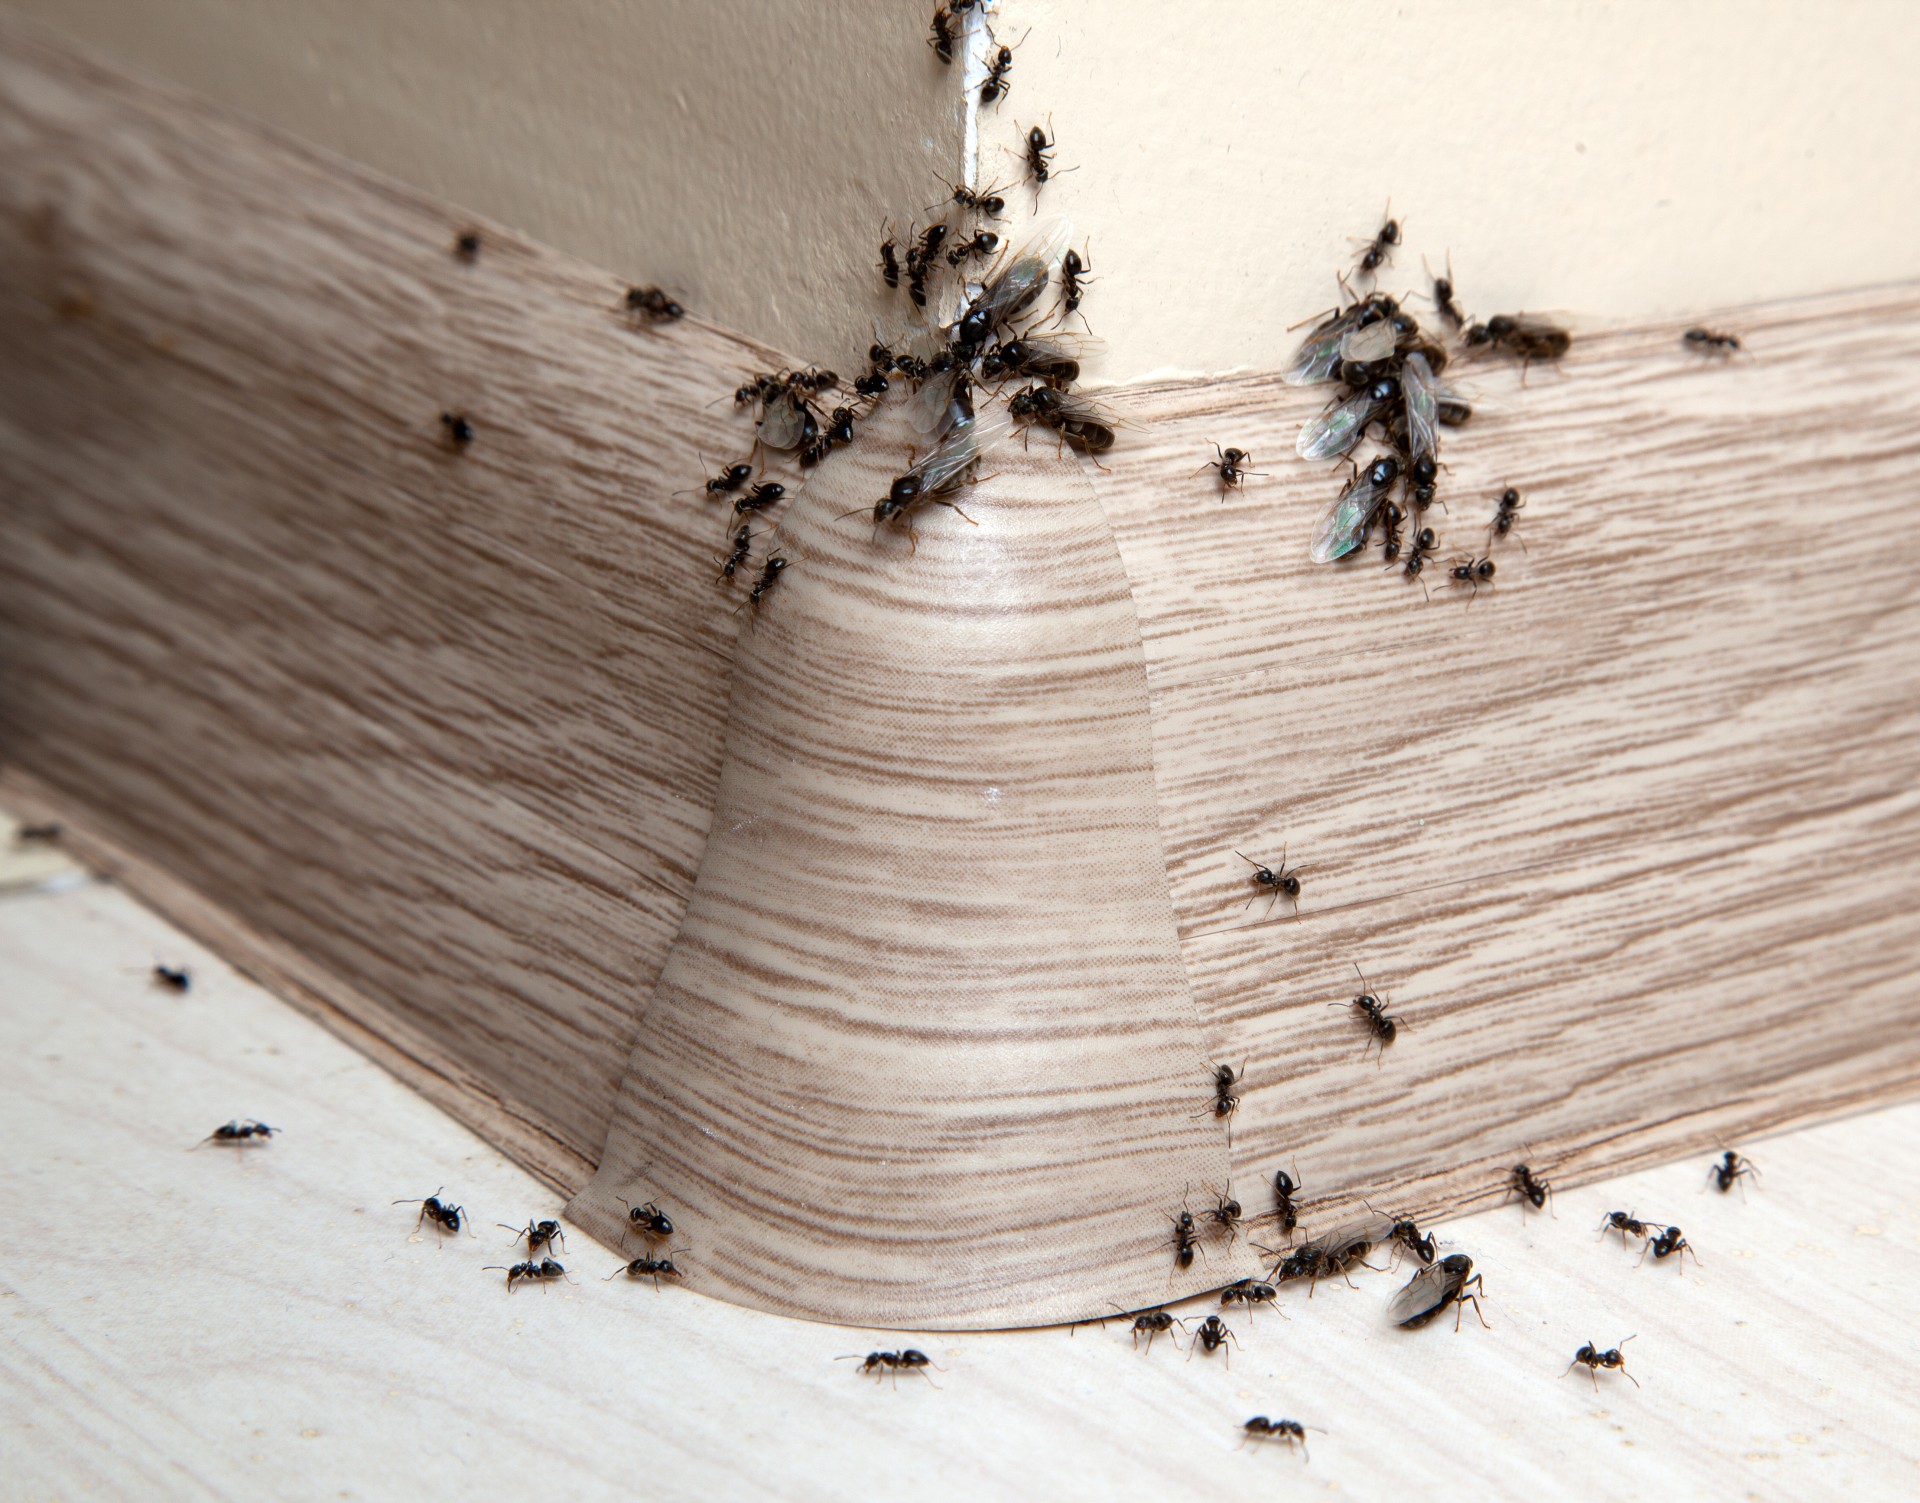 Ant Infestation, Pest Control in Mitcham, Mitcham Common, Pollards Hill, CR4. Call Now 020 8166 9746